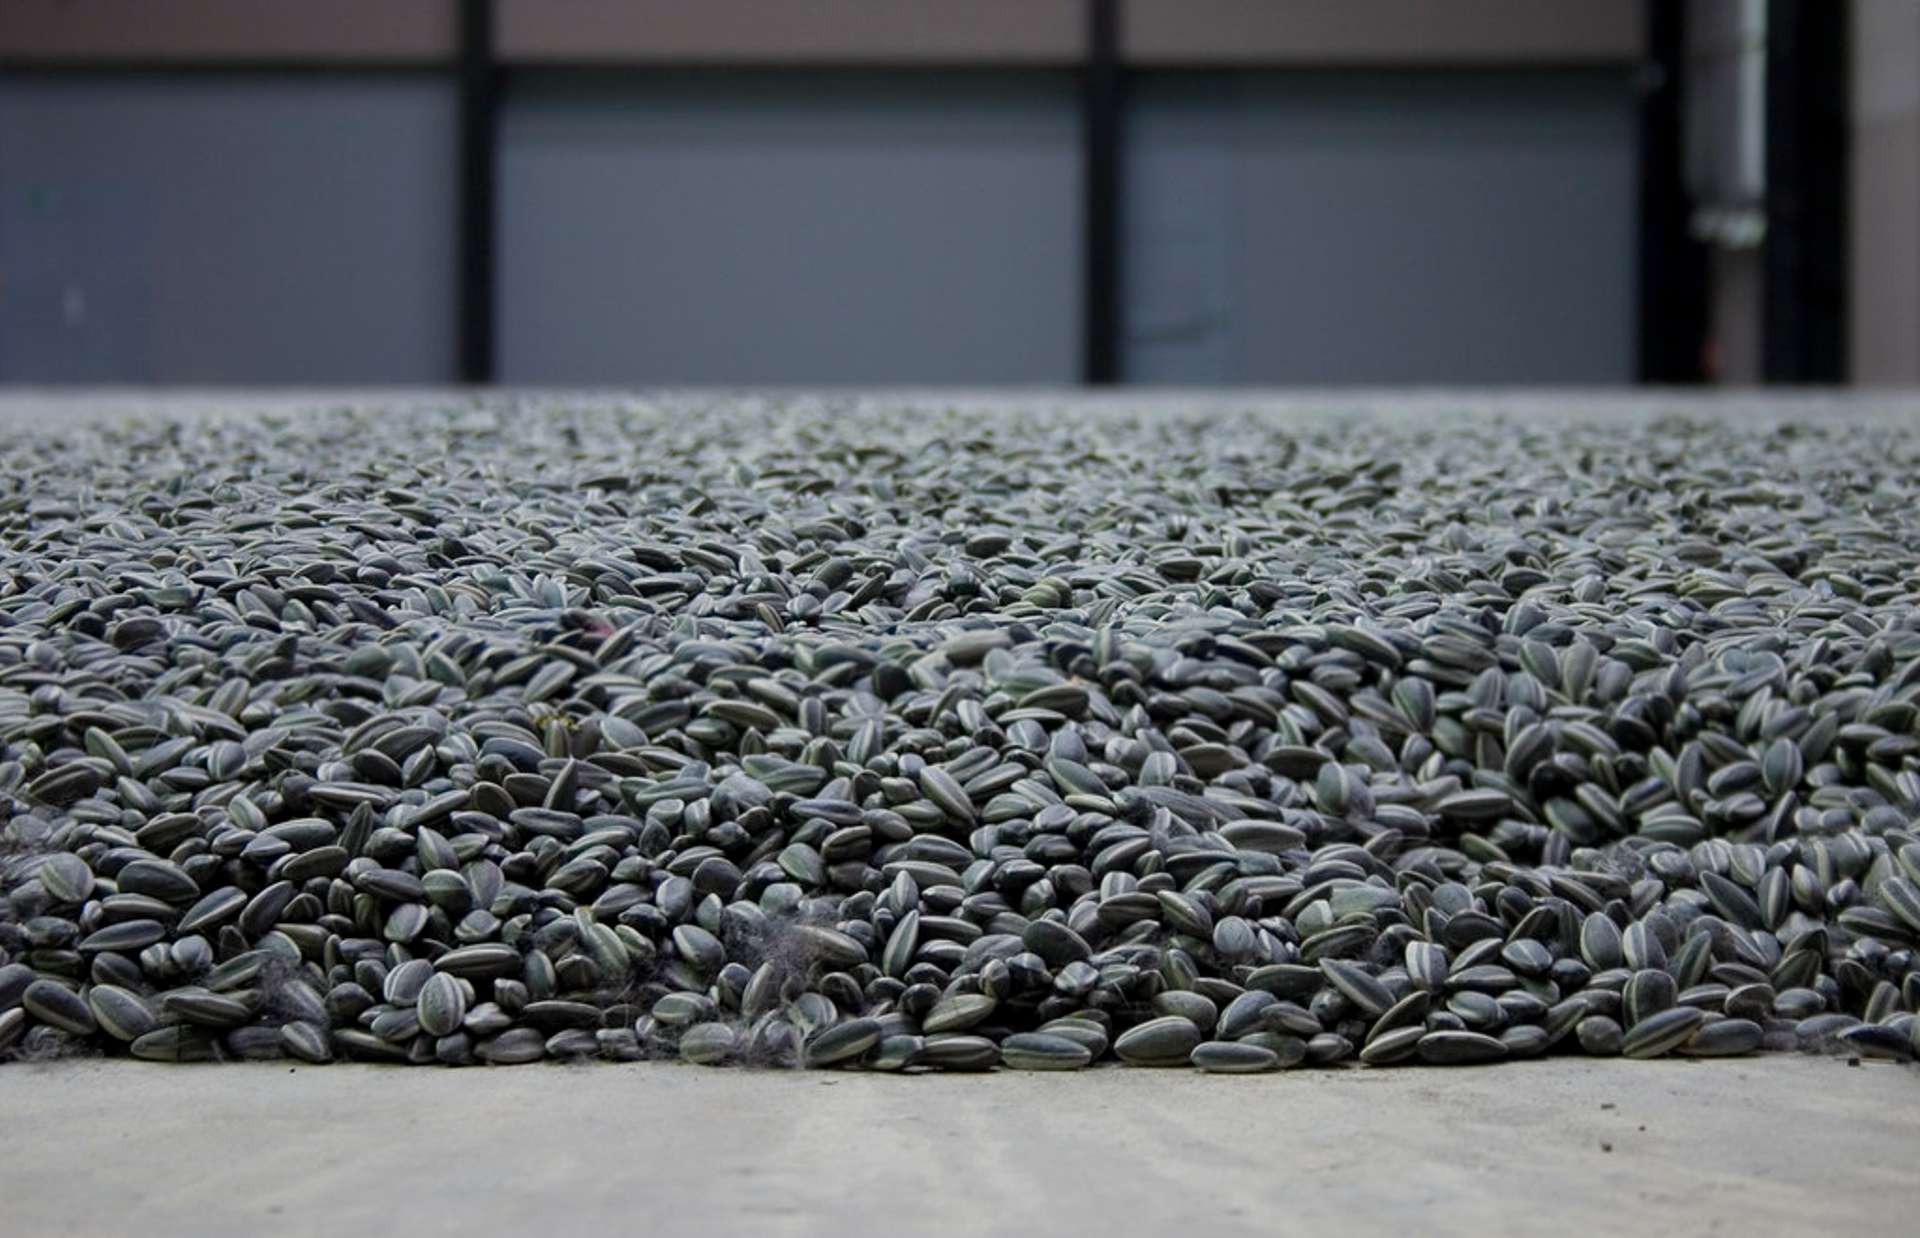 A close-up of Ai Weiwei's Sunflower Seeds installation at the Tate Modern, in London 2010.